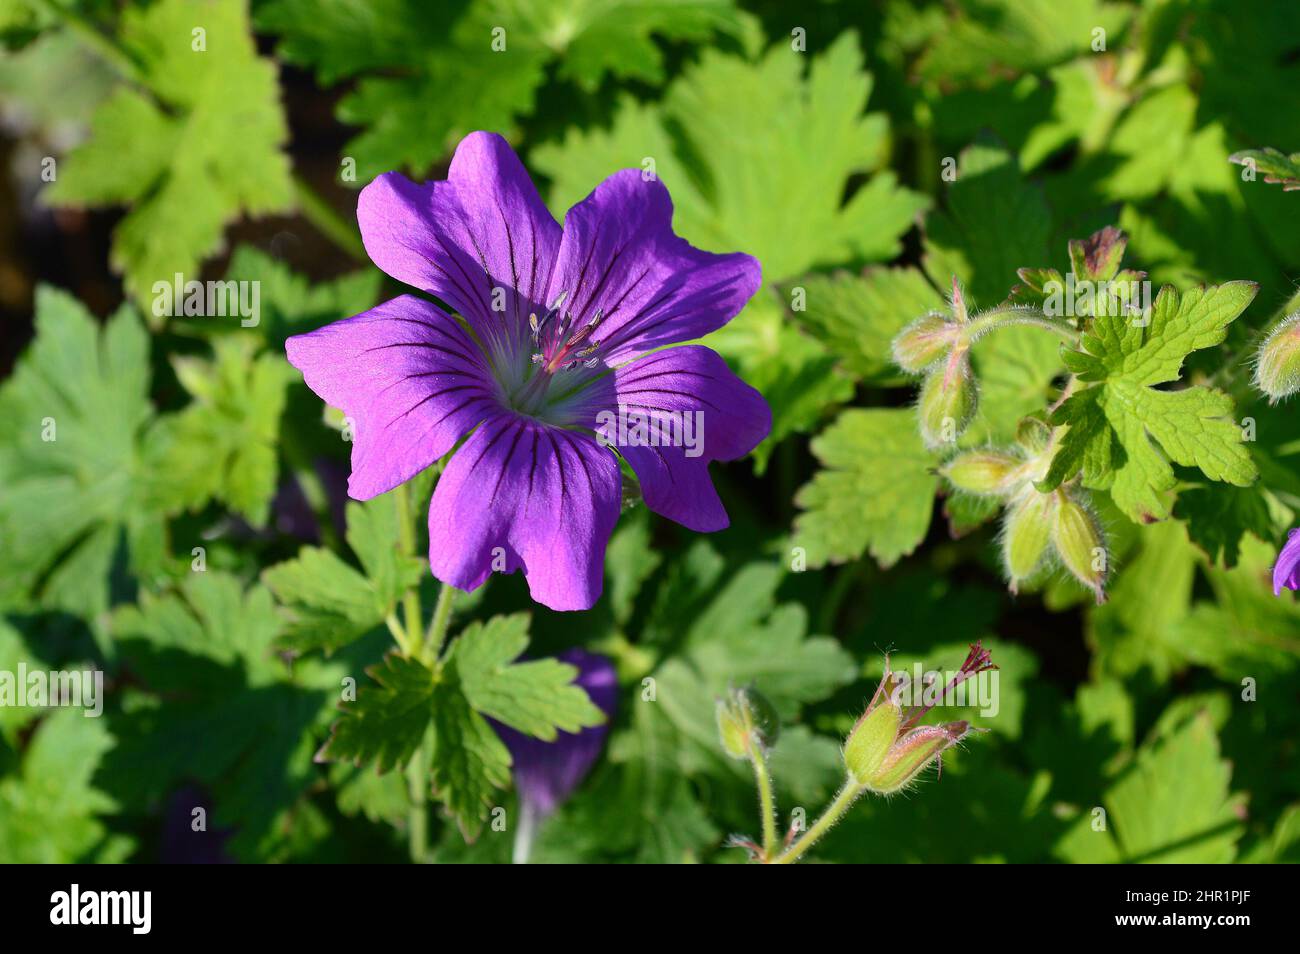 Close up of a flower of the herbaceous plant Geranium Sirak. Stock Photo